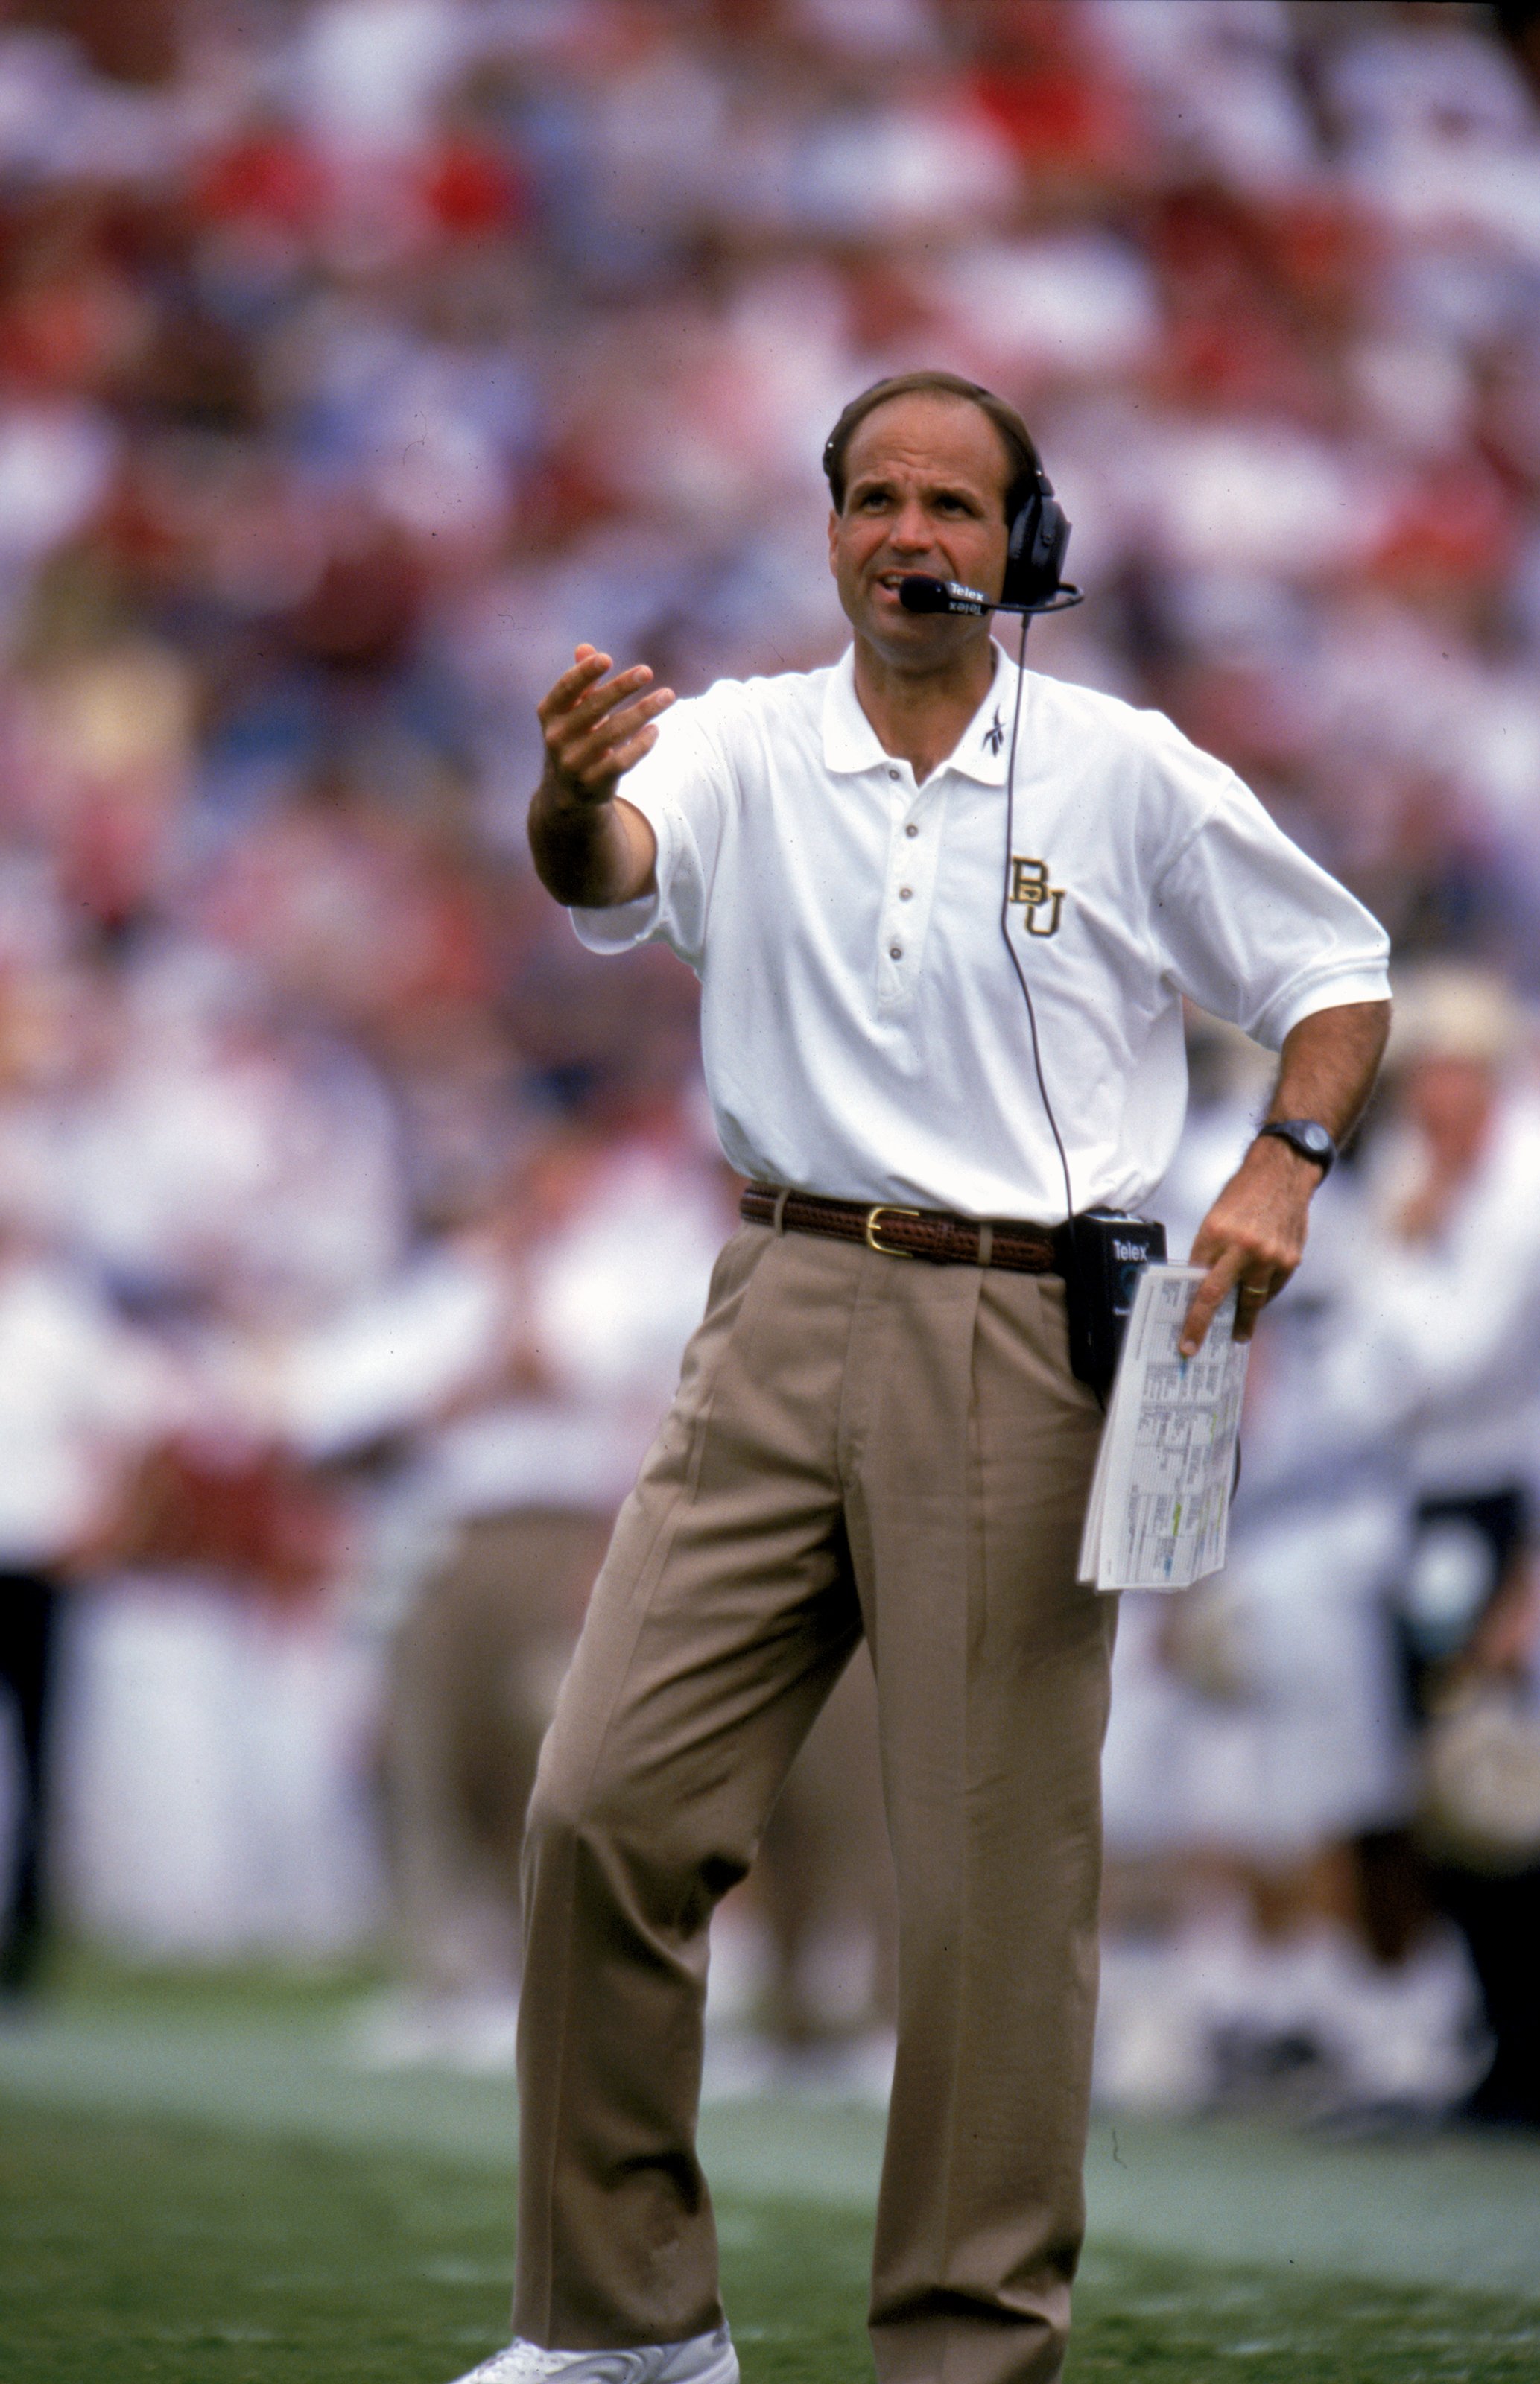 18 Sep 1999: Kevin Steele of the Baylor Bears motions from the sidelines during a game against the Oklahoma Sooners at Owen Field in Norman, Oklahoma. The Sooners defeated the Bears 41-10.